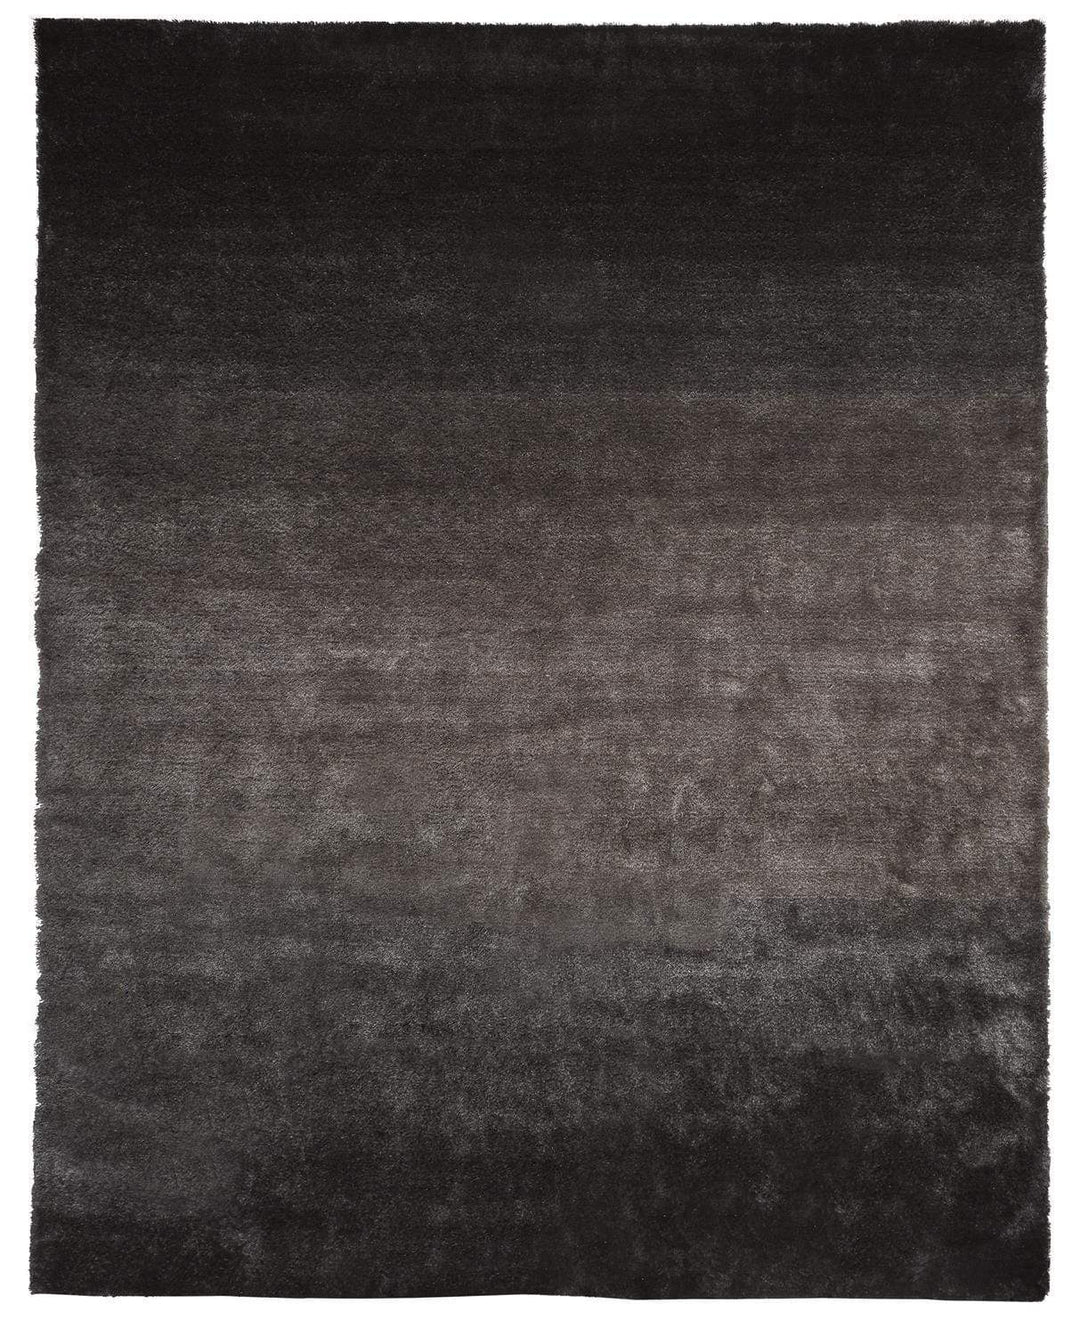 Feizy Feizy Indochine Plush Shag Rug - Available in 7 Sizes - Metallic Sheen Gray & Silver Mink 2' x 3'-4" 4944550FGRY000A25